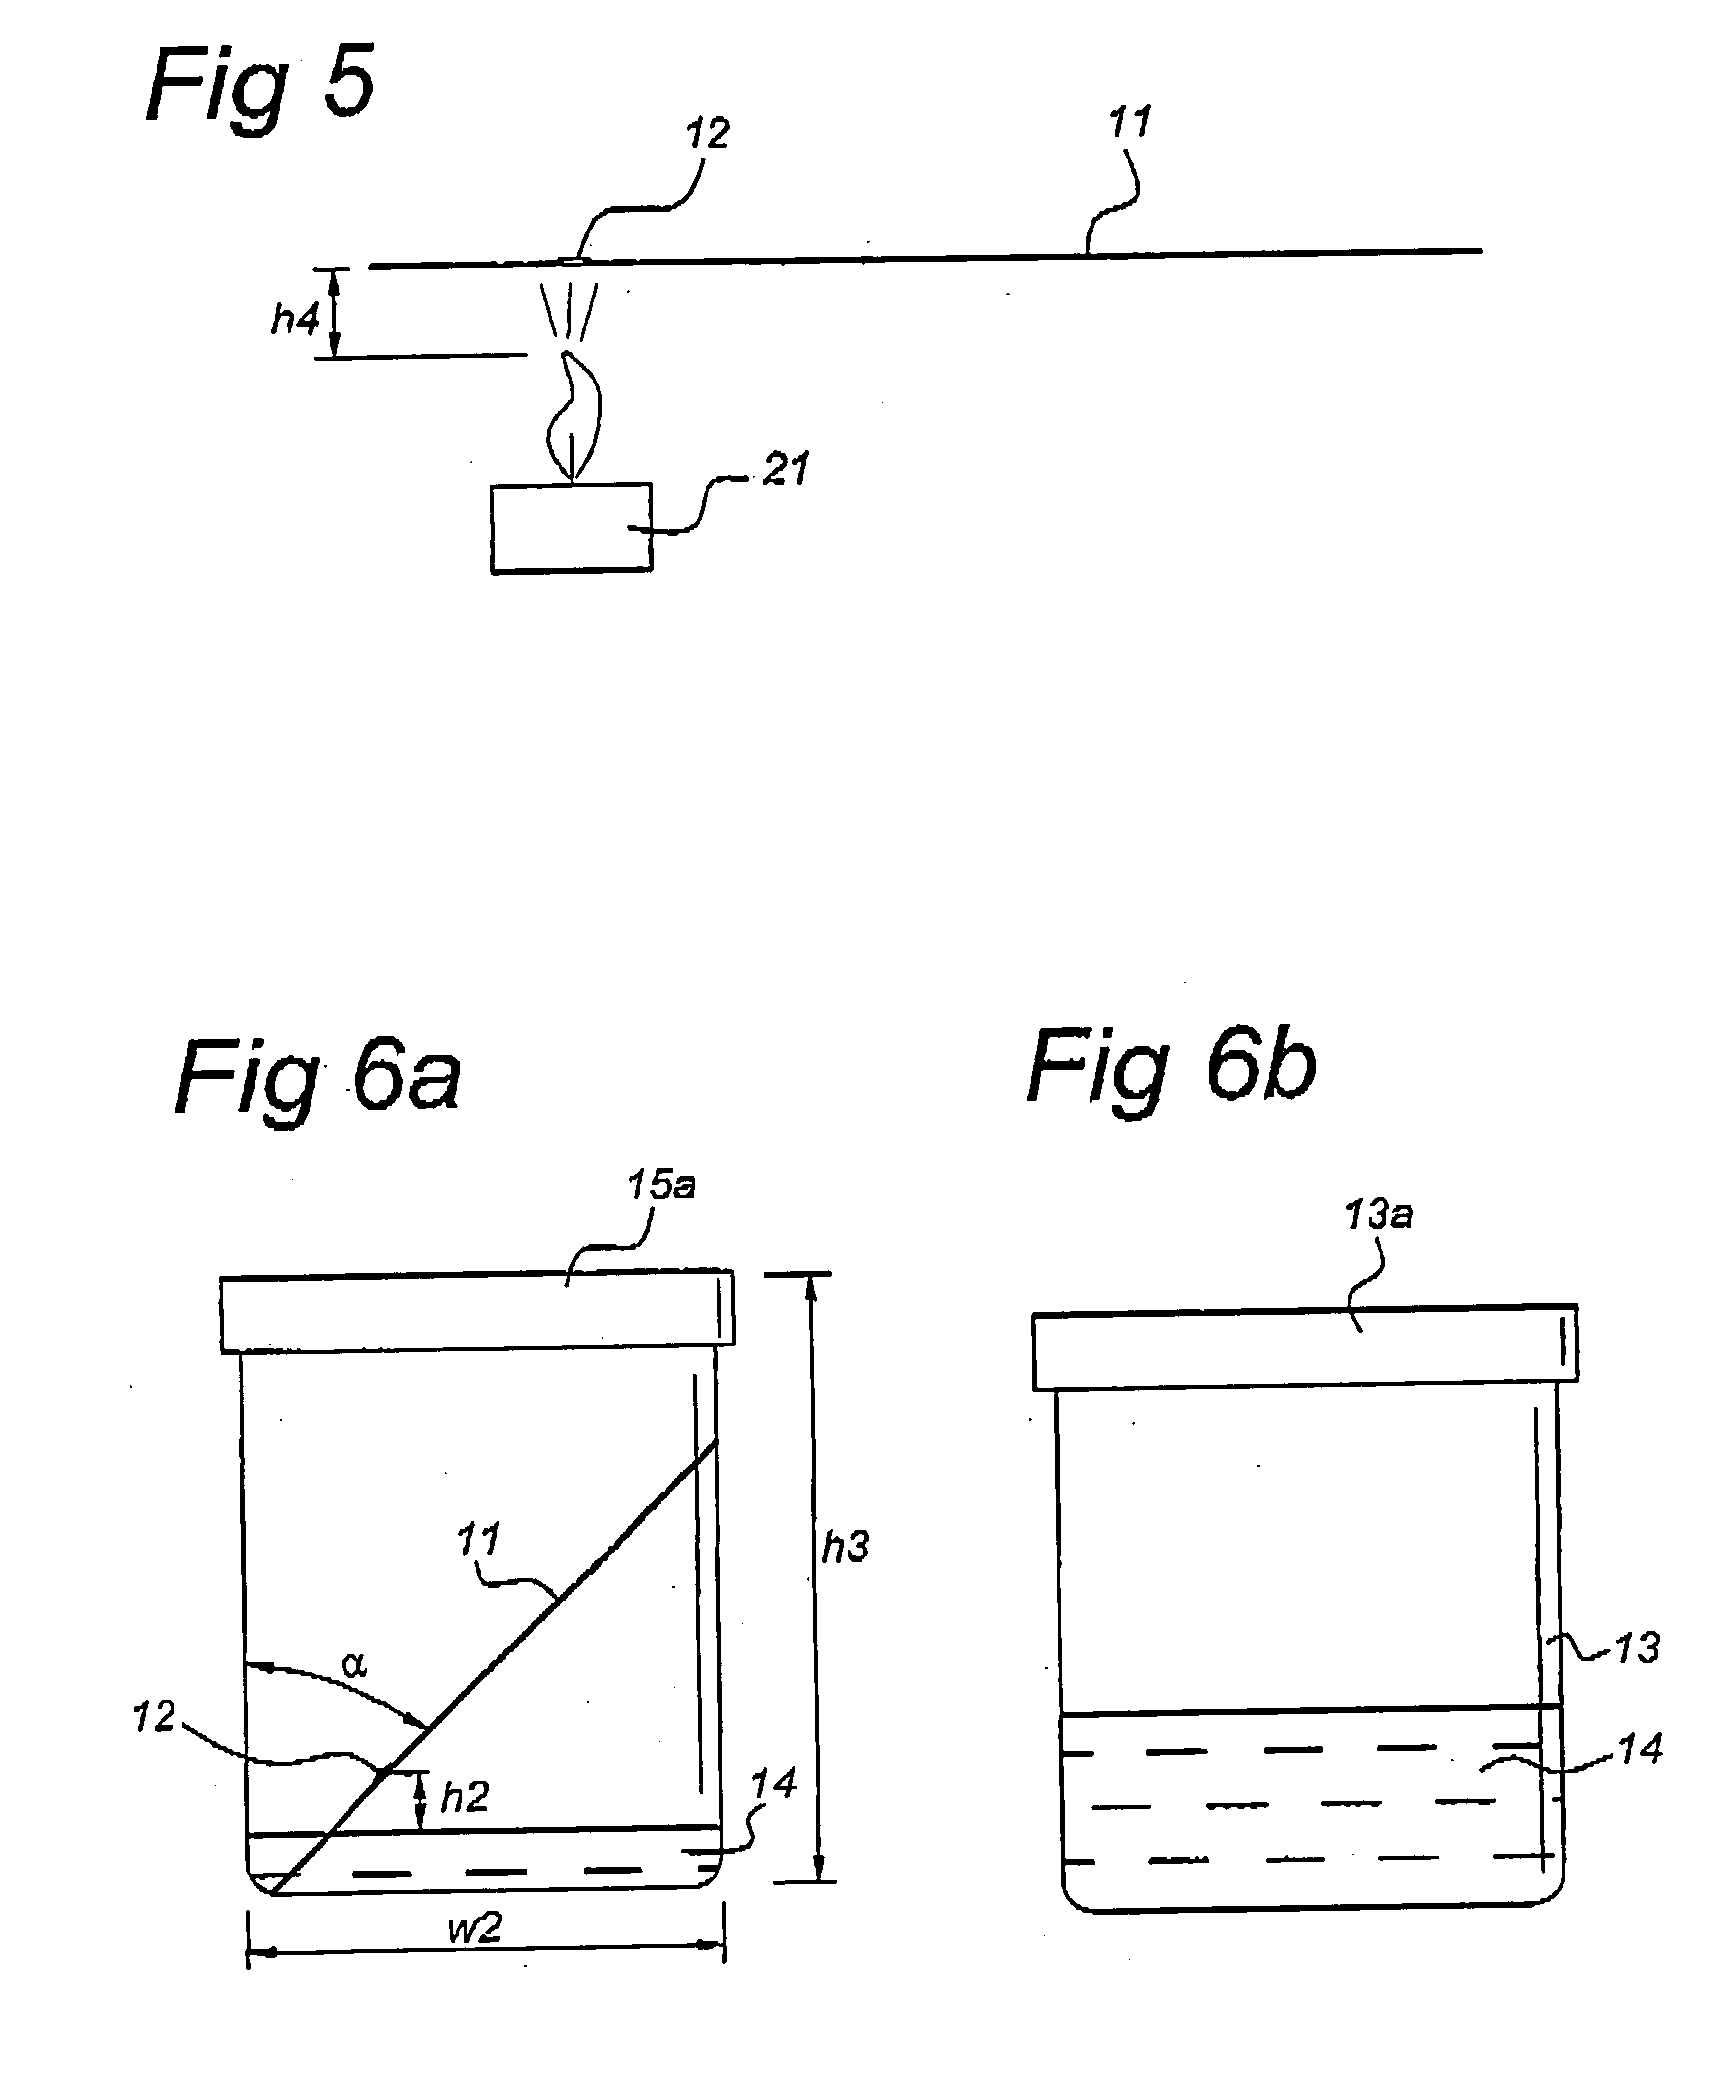 Method for the detection of a cannabinoid, detection kit, and developing solvent